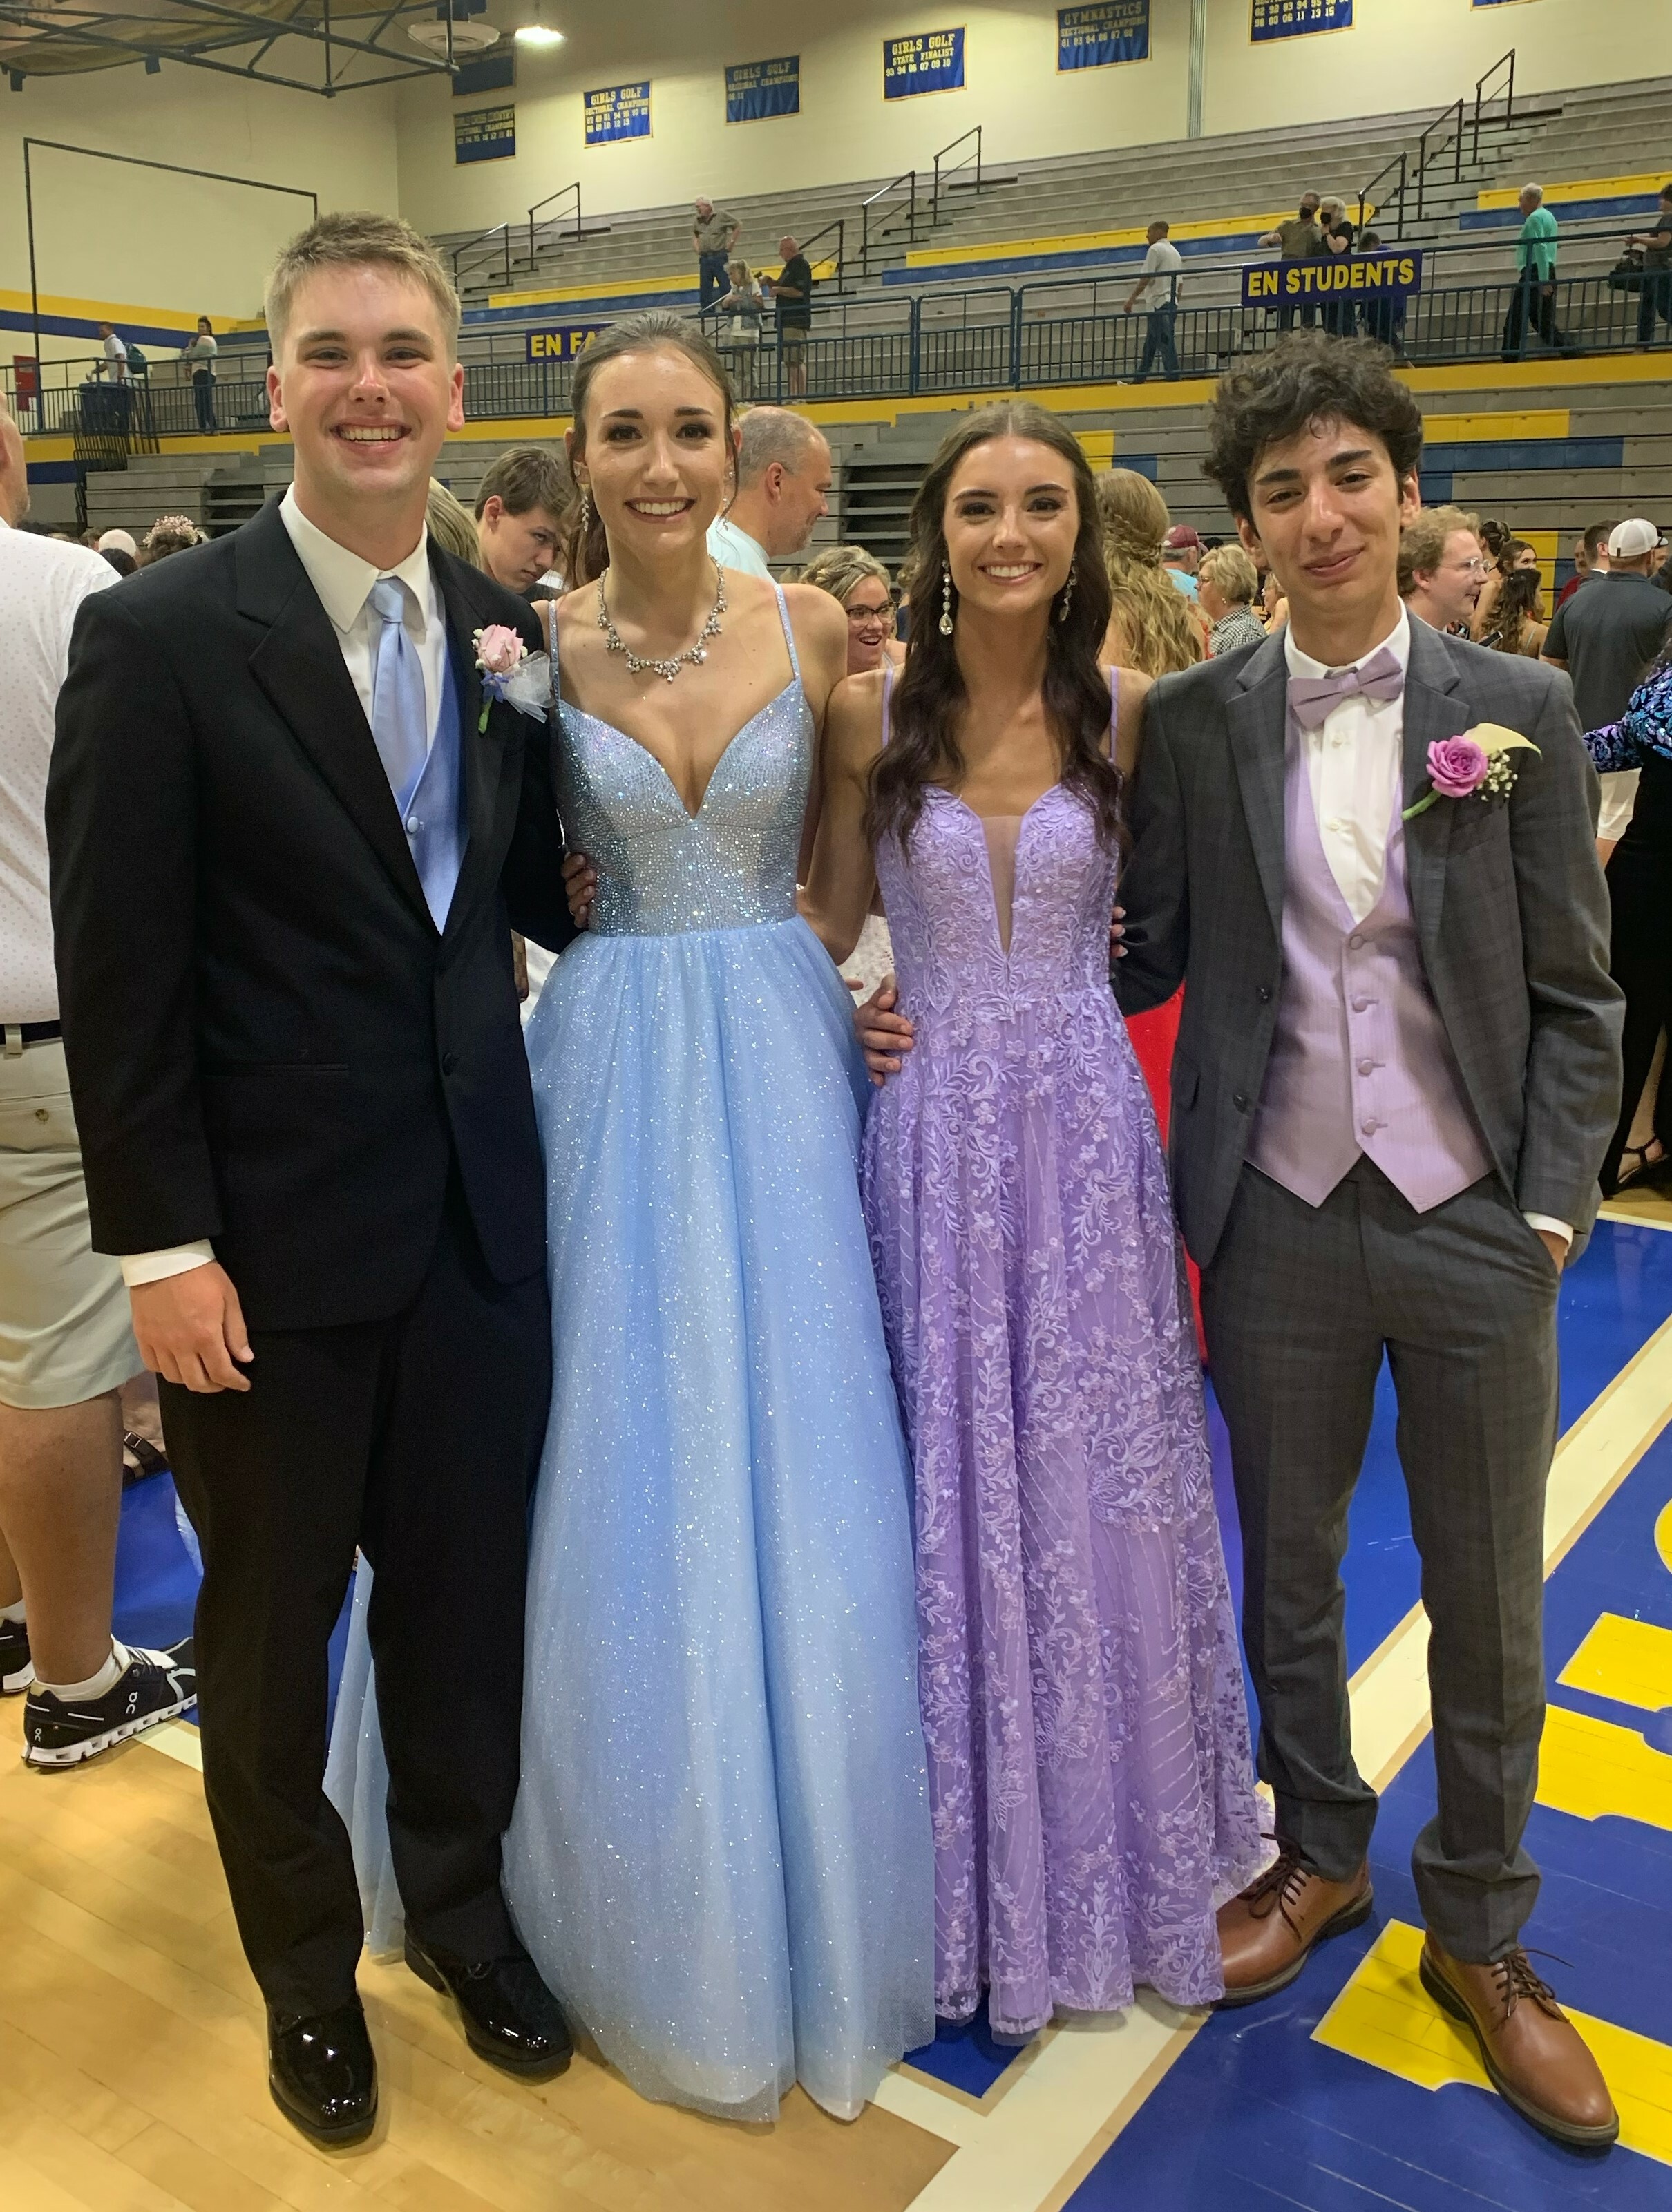 Four high school students, two boys and two girls, pose for a picture in their prom outfits